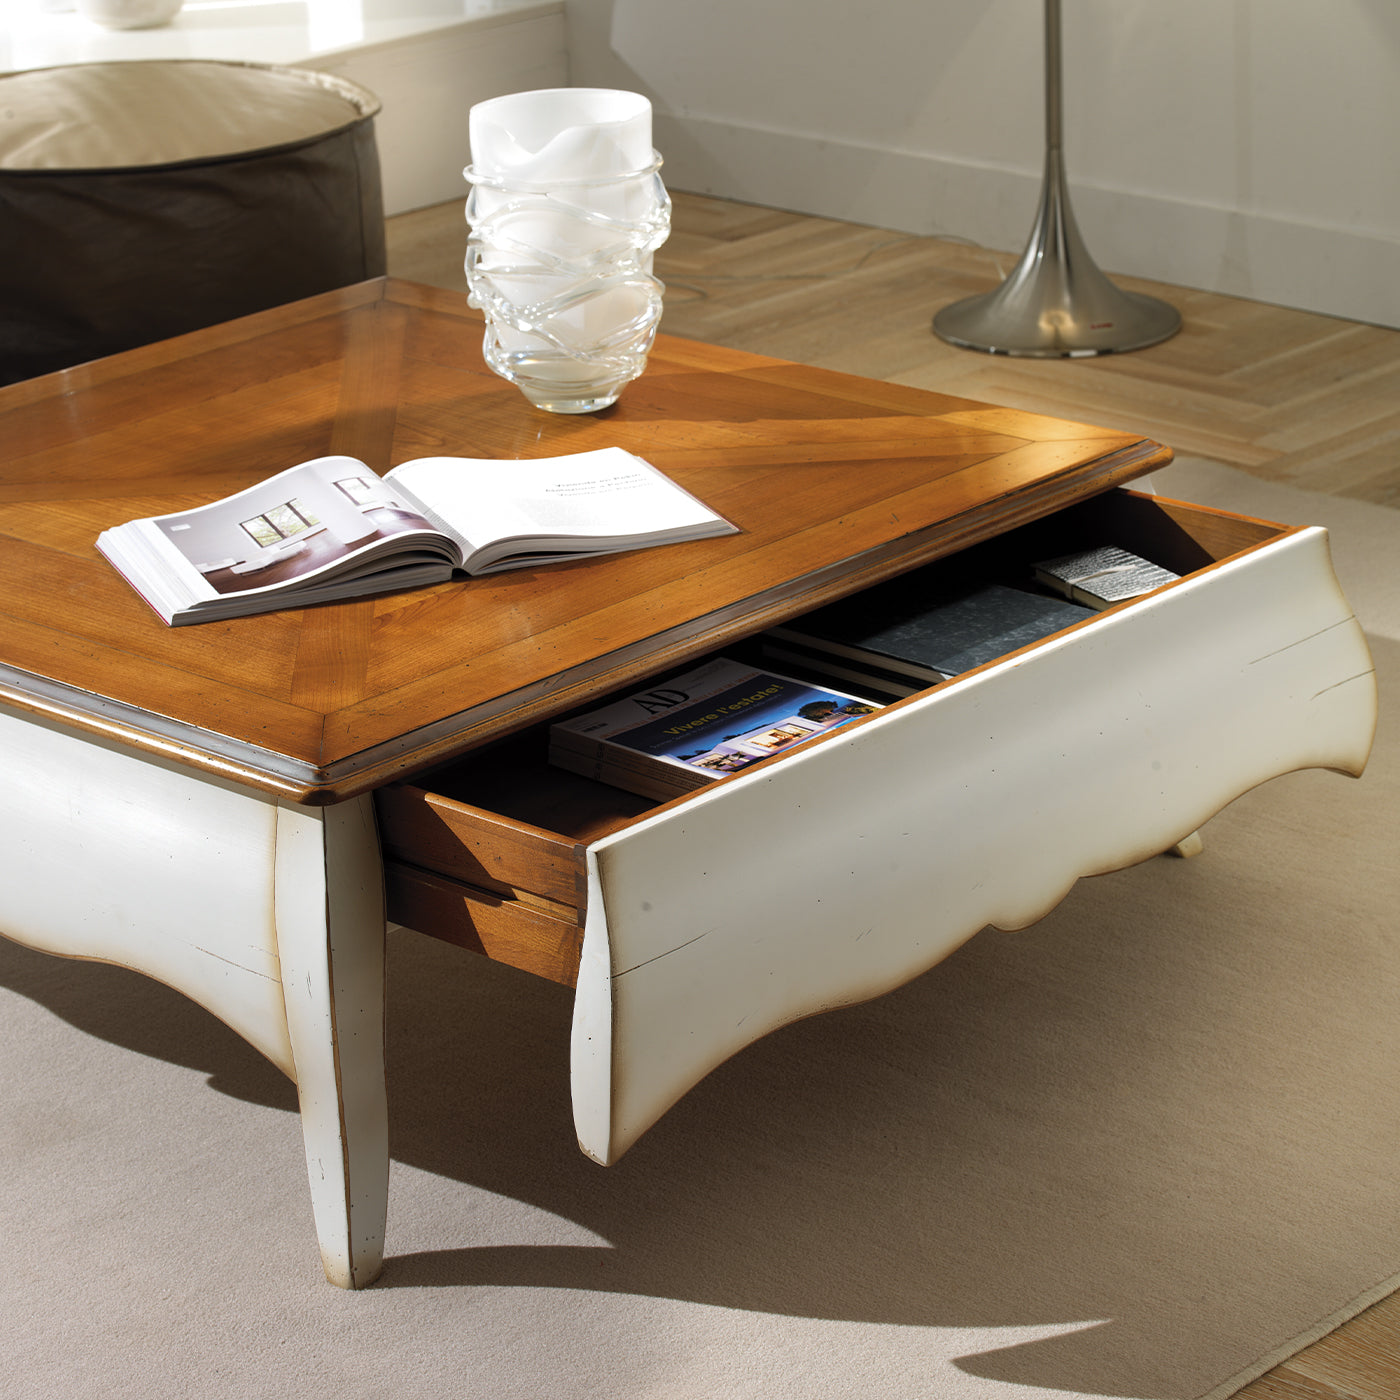 Wooden Coffee Table - Alternative view 1